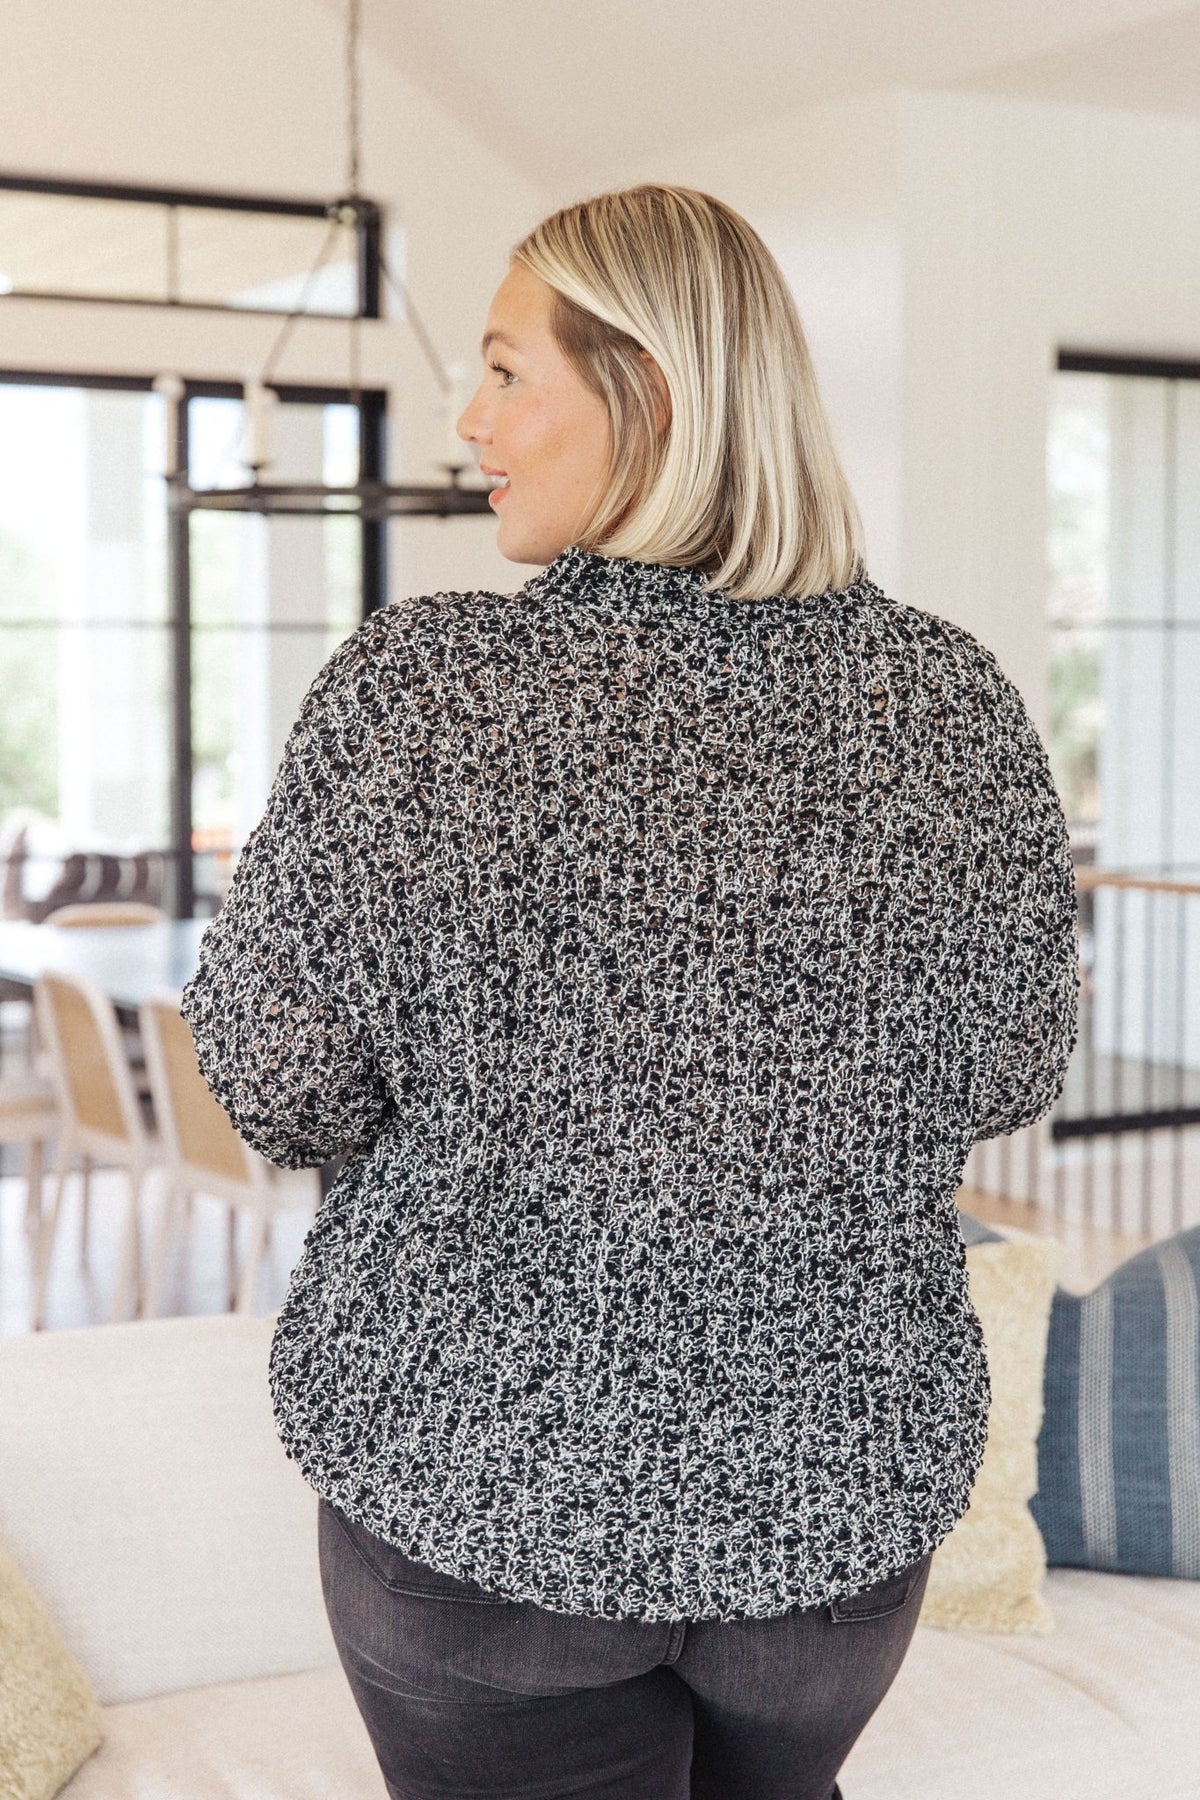 Low and Slow Sweater - Happily Ever Atchison Shop Co.